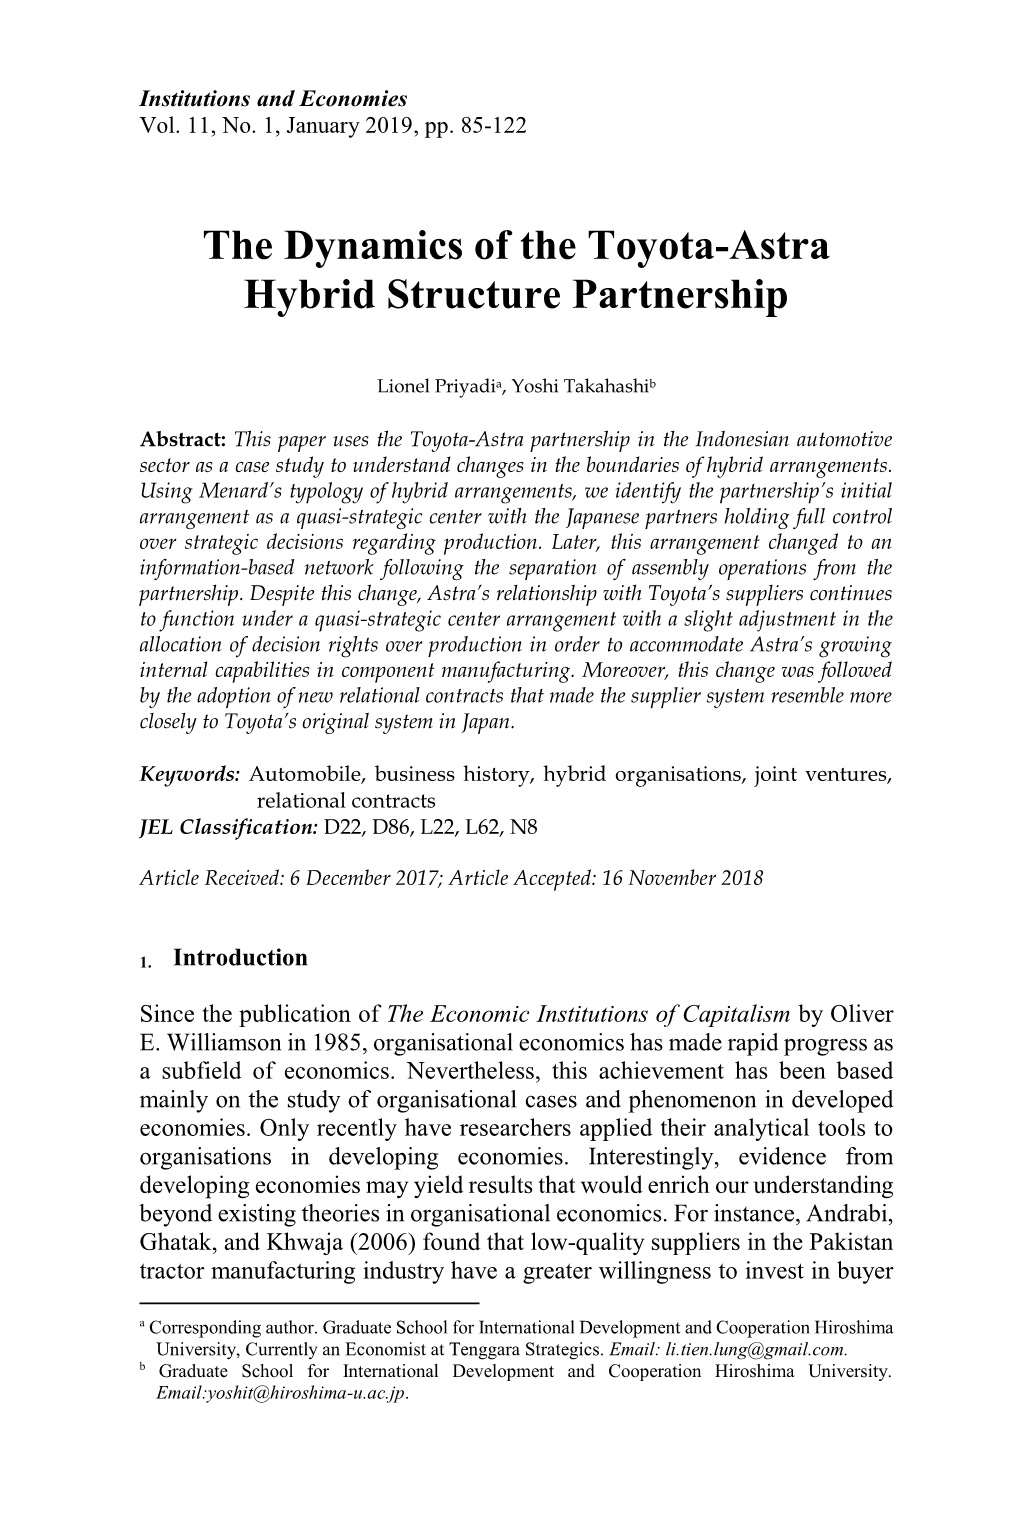 The Dynamics of the Toyota-Astra Hybrid Structure Partnership